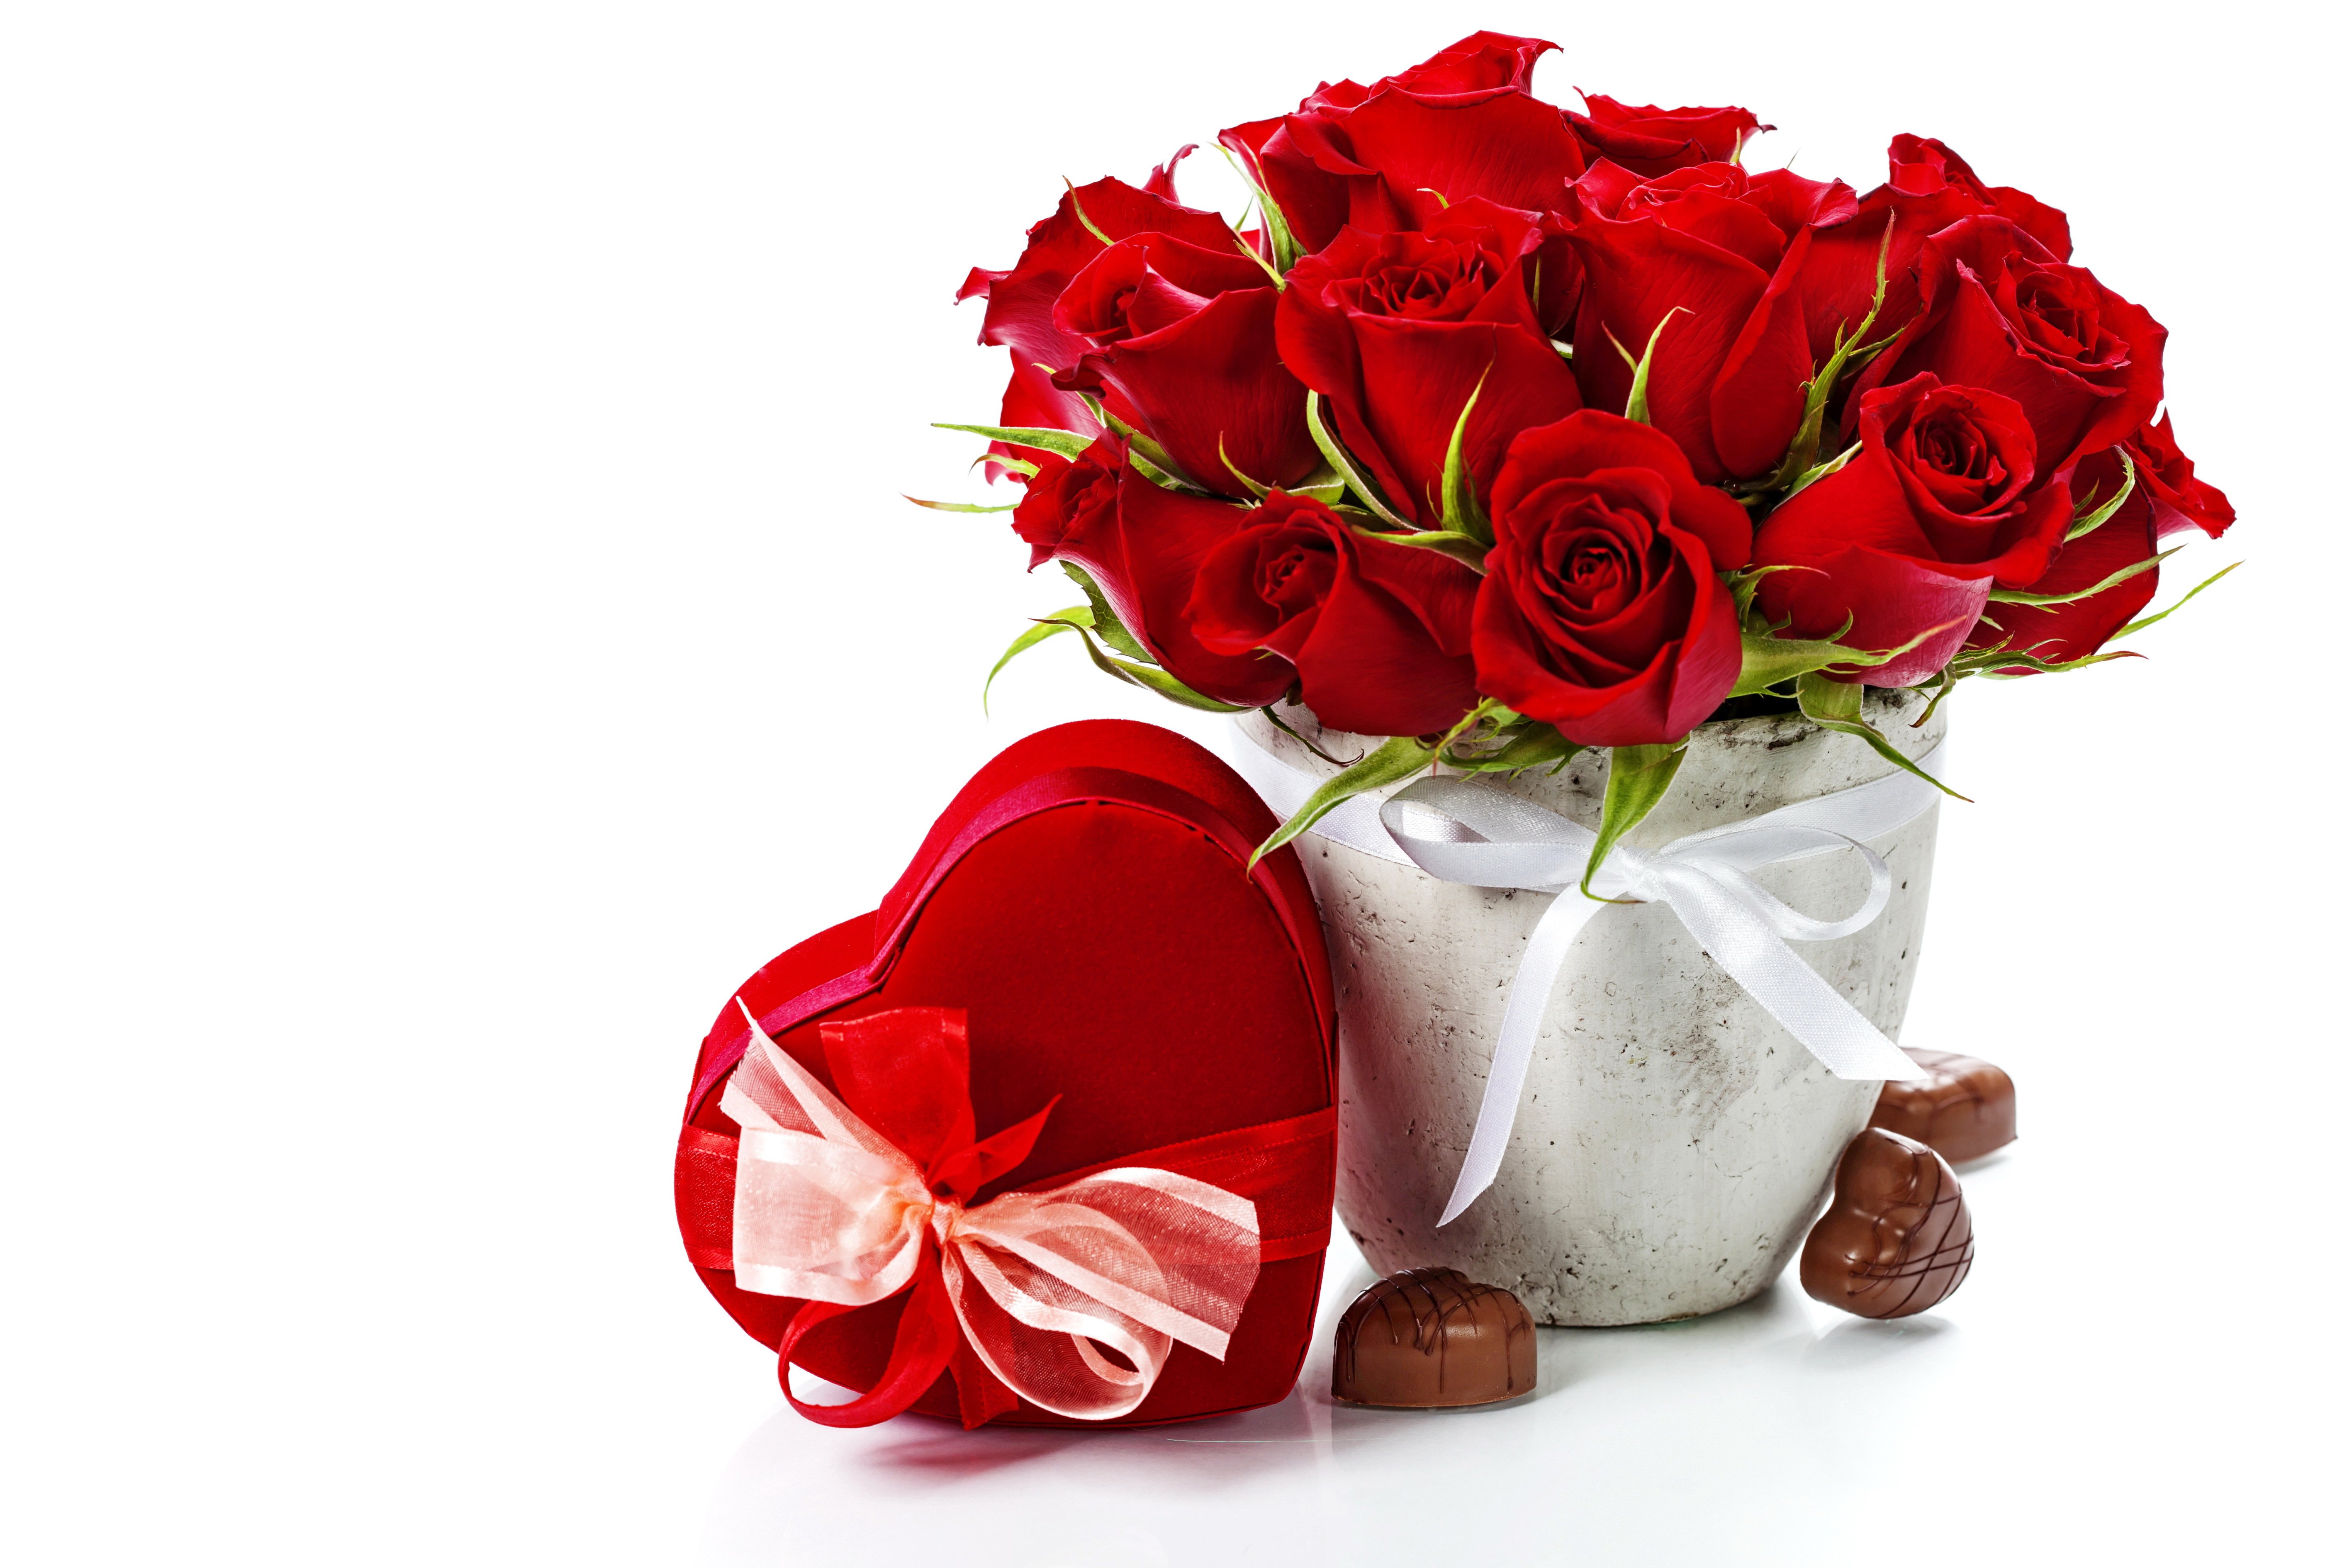 rose, Flowers, Red, Love, Romance, Life, For, Chocolate, Gift, Couple, Bouquet Wallpaper